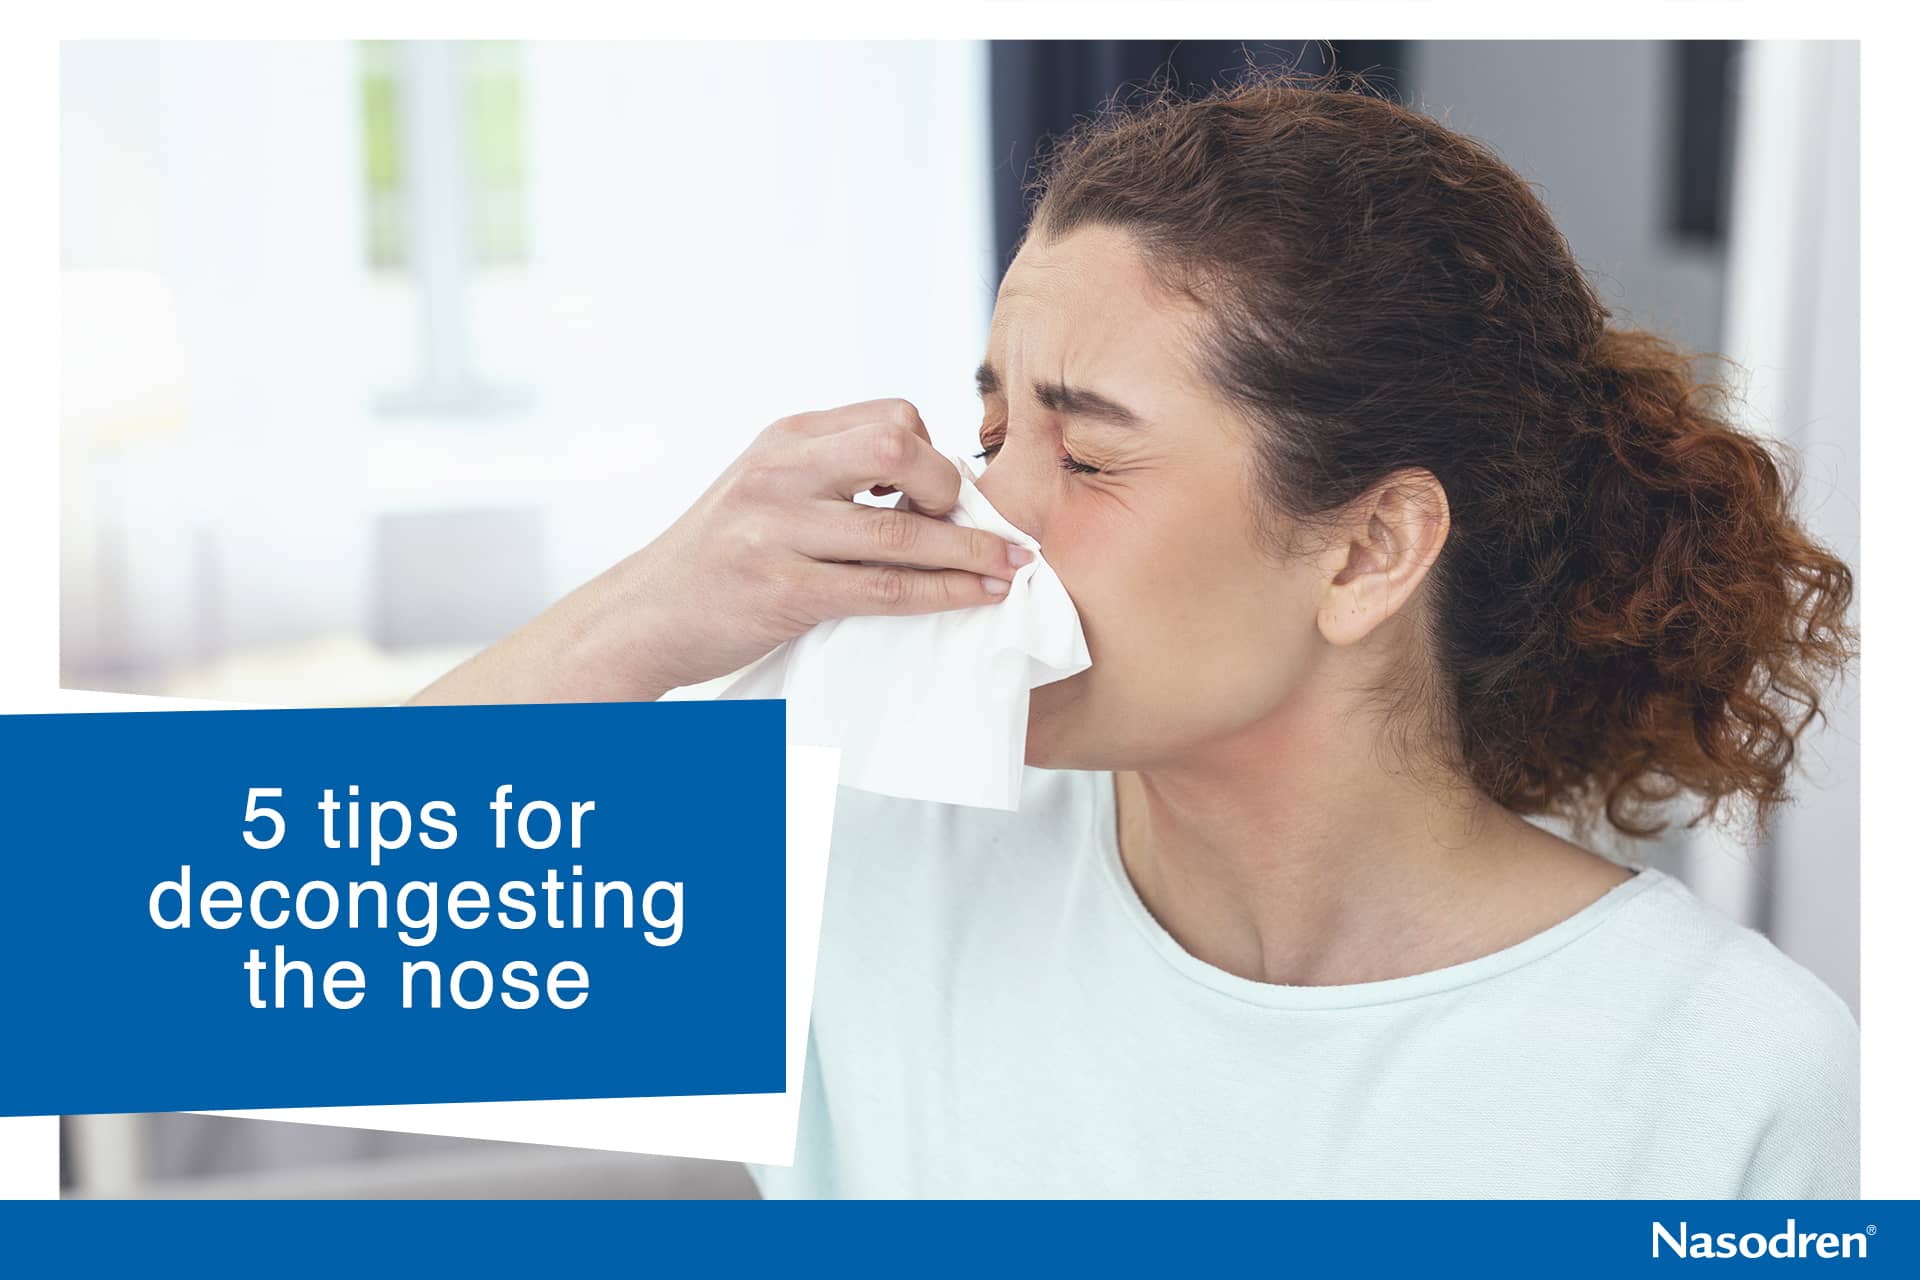 5 tips for decongesting the nose